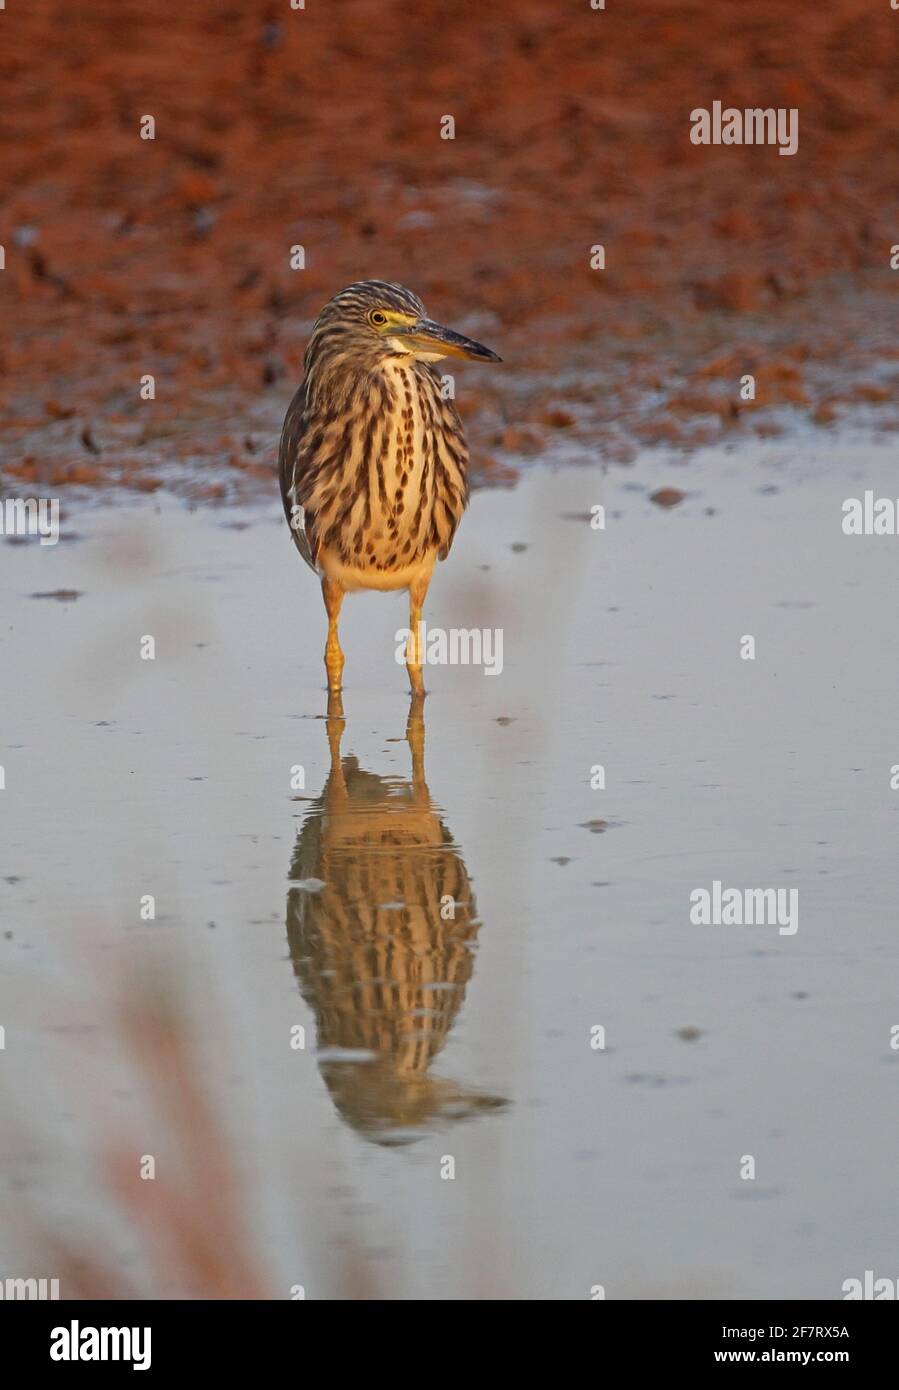 Chinese Pond-heron (Ardeola bacchus) adult standing in shallow water Ang Trapaeng Thmor, Cambodia          January Stock Photo